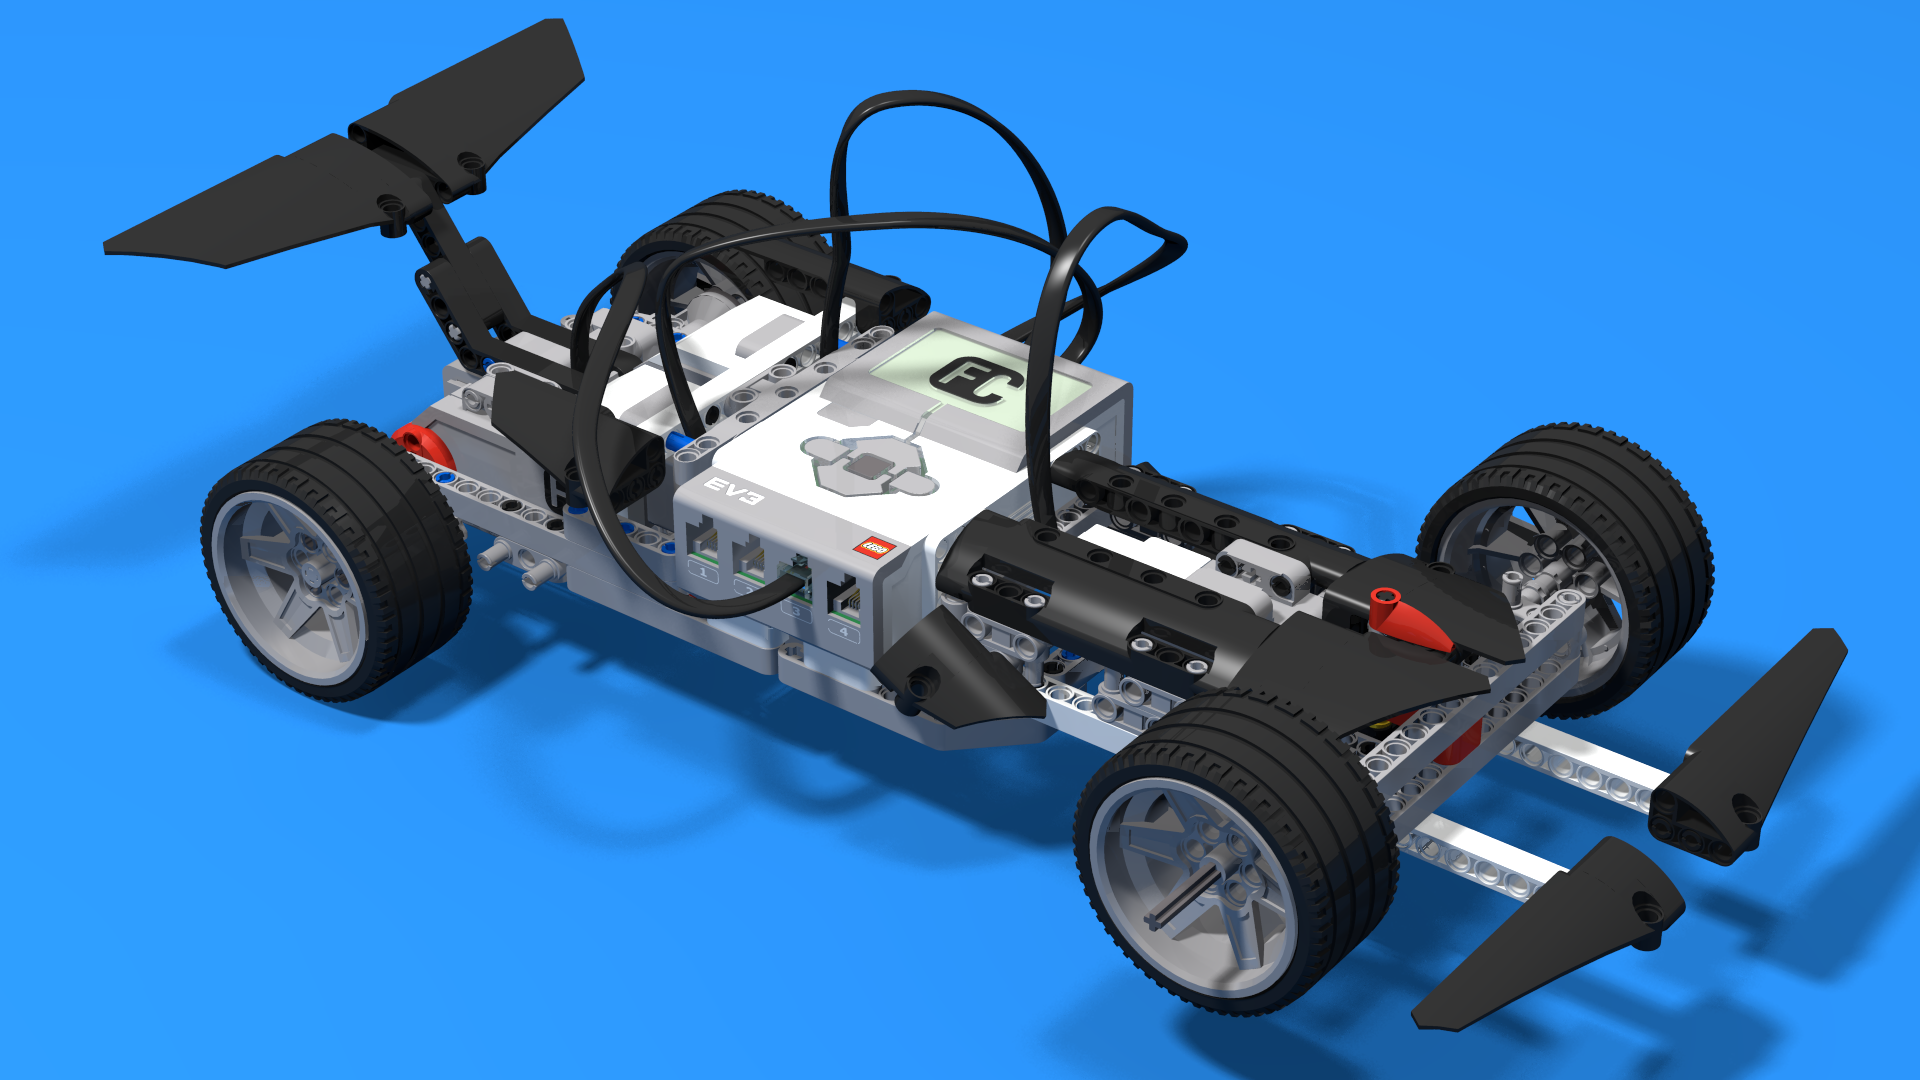 ff03bb5f18b0d65a2e4a7792ab86a6c3b740f949LEGO-Mindstorms-Ev3-Formula-1-Robot-Fllcasts-With-Cables